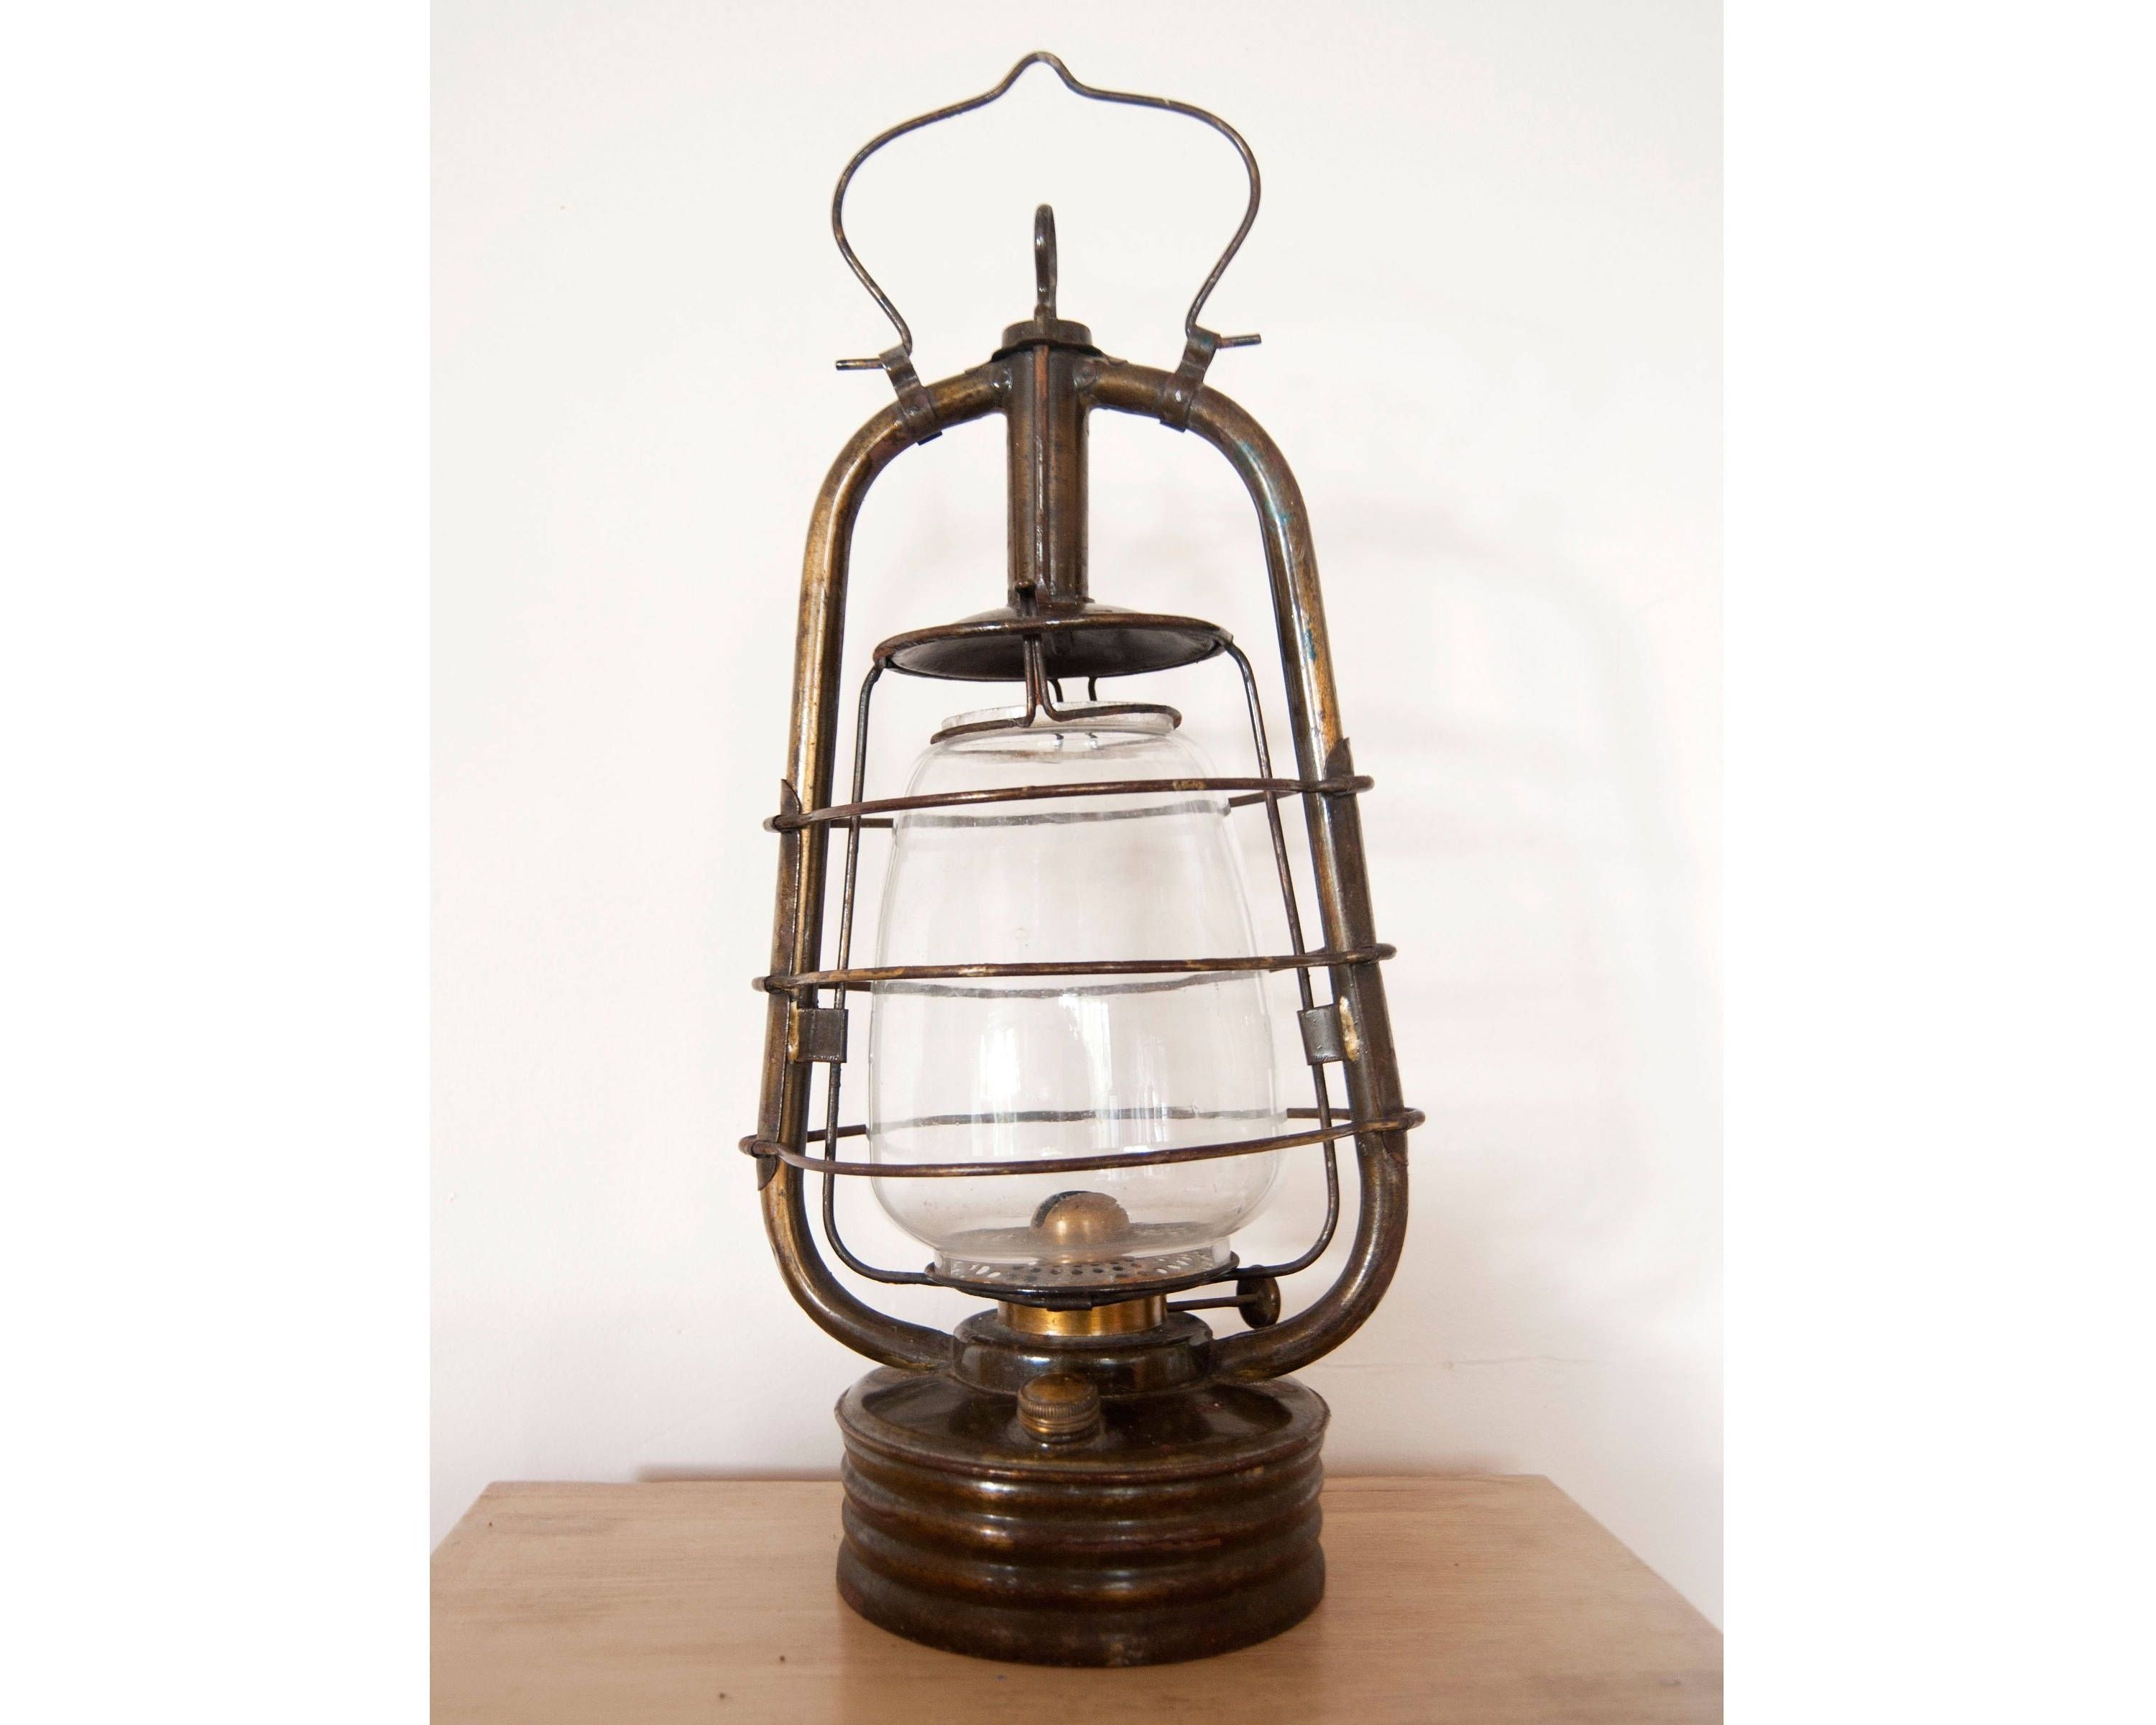 Vintage Lantern Oil Lamp – Antique French Hurricane Brass Lamp With Most Current Outdoor Kerosene Lanterns (View 13 of 20)